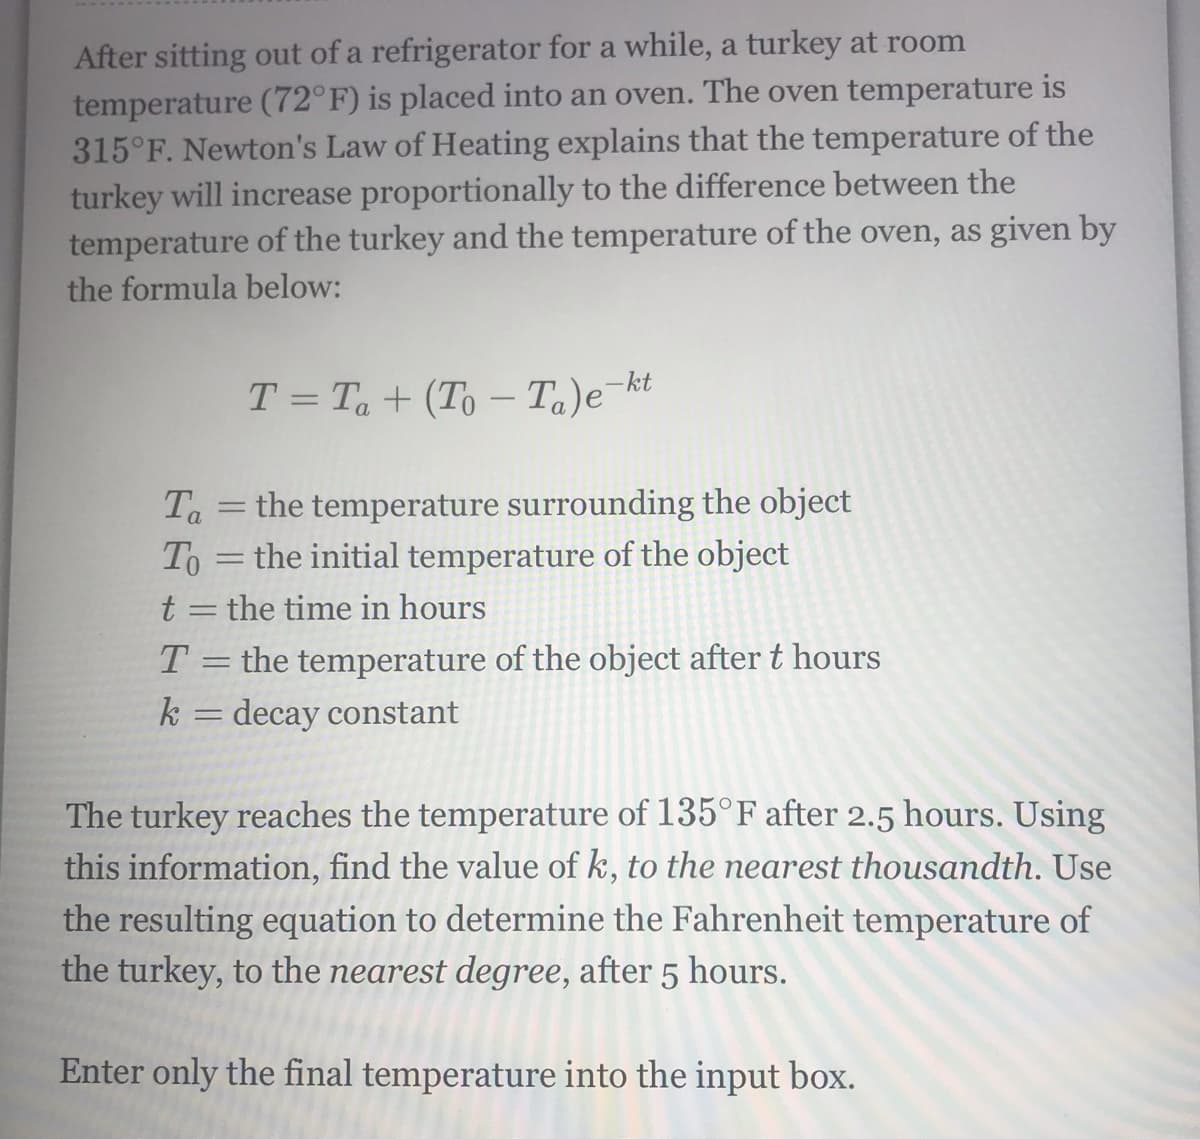 After sitting out of a refrigerator for a while, a turkey at room
temperature (72°F) is placed into an oven. The oven temperature is
315°F. Newton's Law of Heating explains that the temperature of the
turkey will increase proportionally to the difference between the
temperature of the turkey and the temperature of the oven, as given by
the formula below:
T = Ta+ (To – Ta)e¬kt
-
Ta = the temperature surrounding the object
To = the initial temperature of the object
t = the time in hours
T = the temperature of the object after t hours
k = decay constant
%3D
The turkey reaches the temperature of 135°F after 2.5 hours. Using
this information, find the value of k, to the nearest thousandth. Use
the resulting equation to determine the Fahrenheit temperature of
the turkey, to the nearest degree, after 5 hours.
Enter only the final temperature into the input box.
